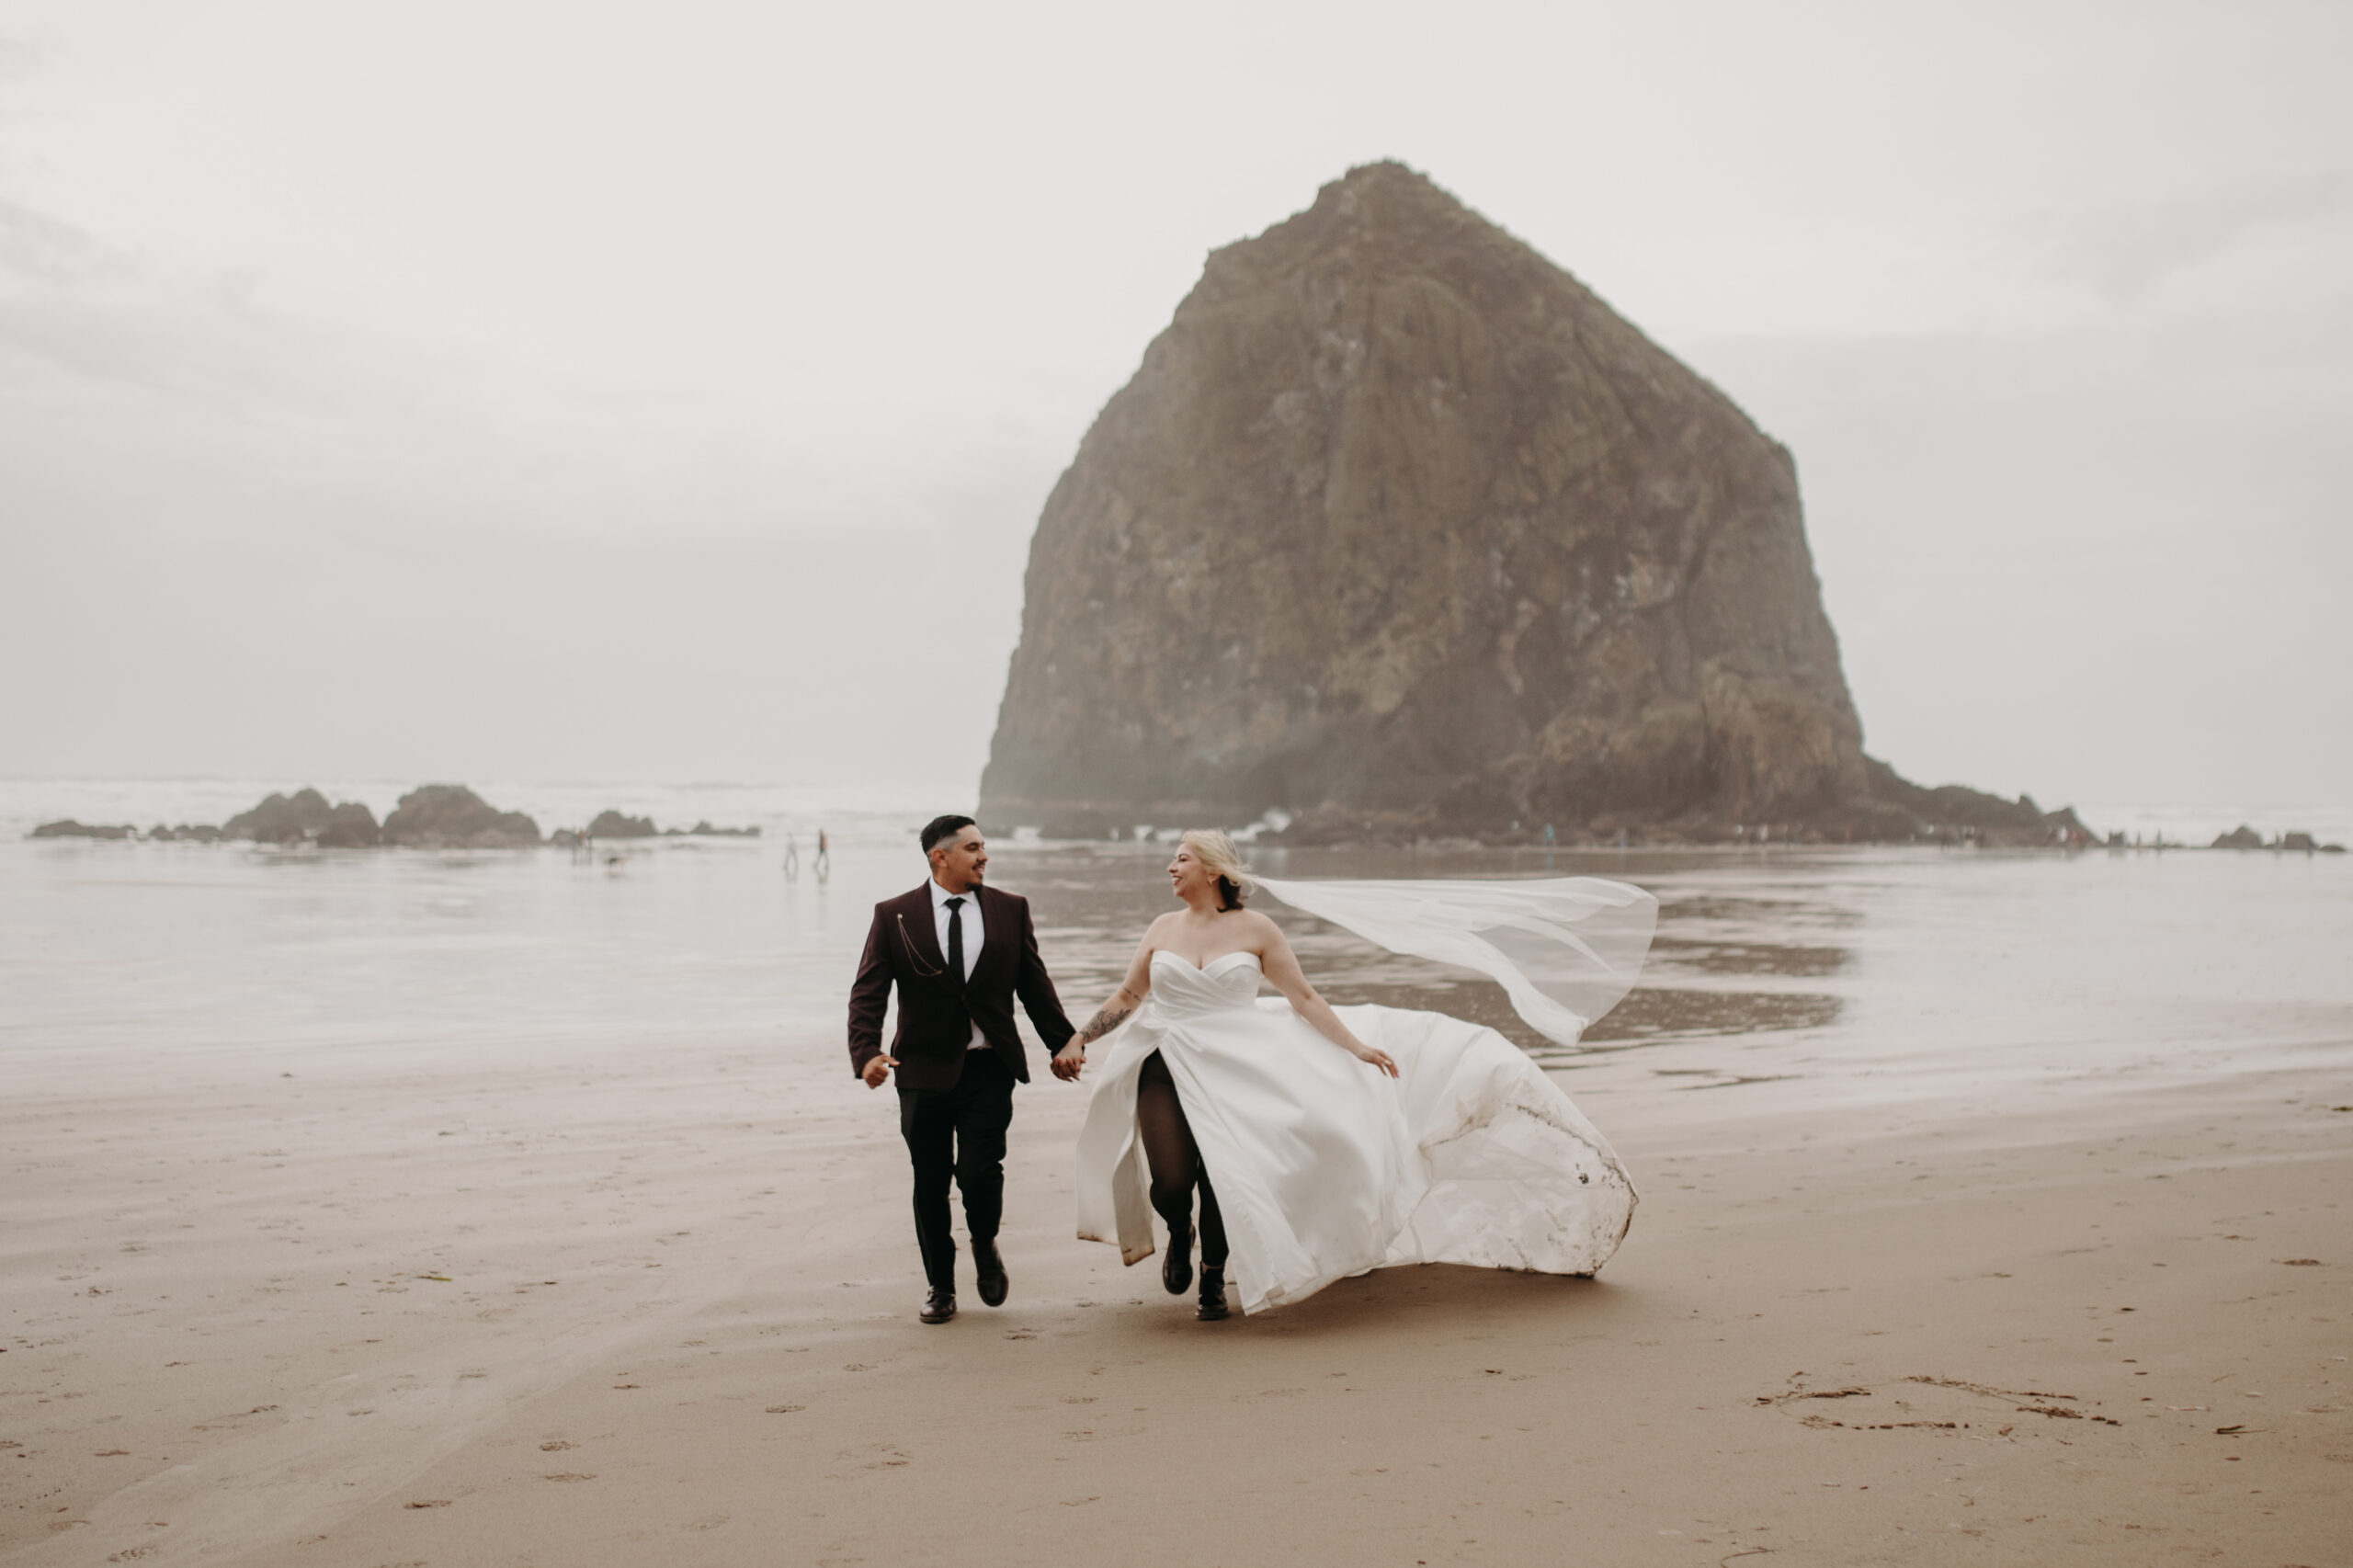 man in a suit and woman in a wedding dress run on beach smiling with haystack rock in the background